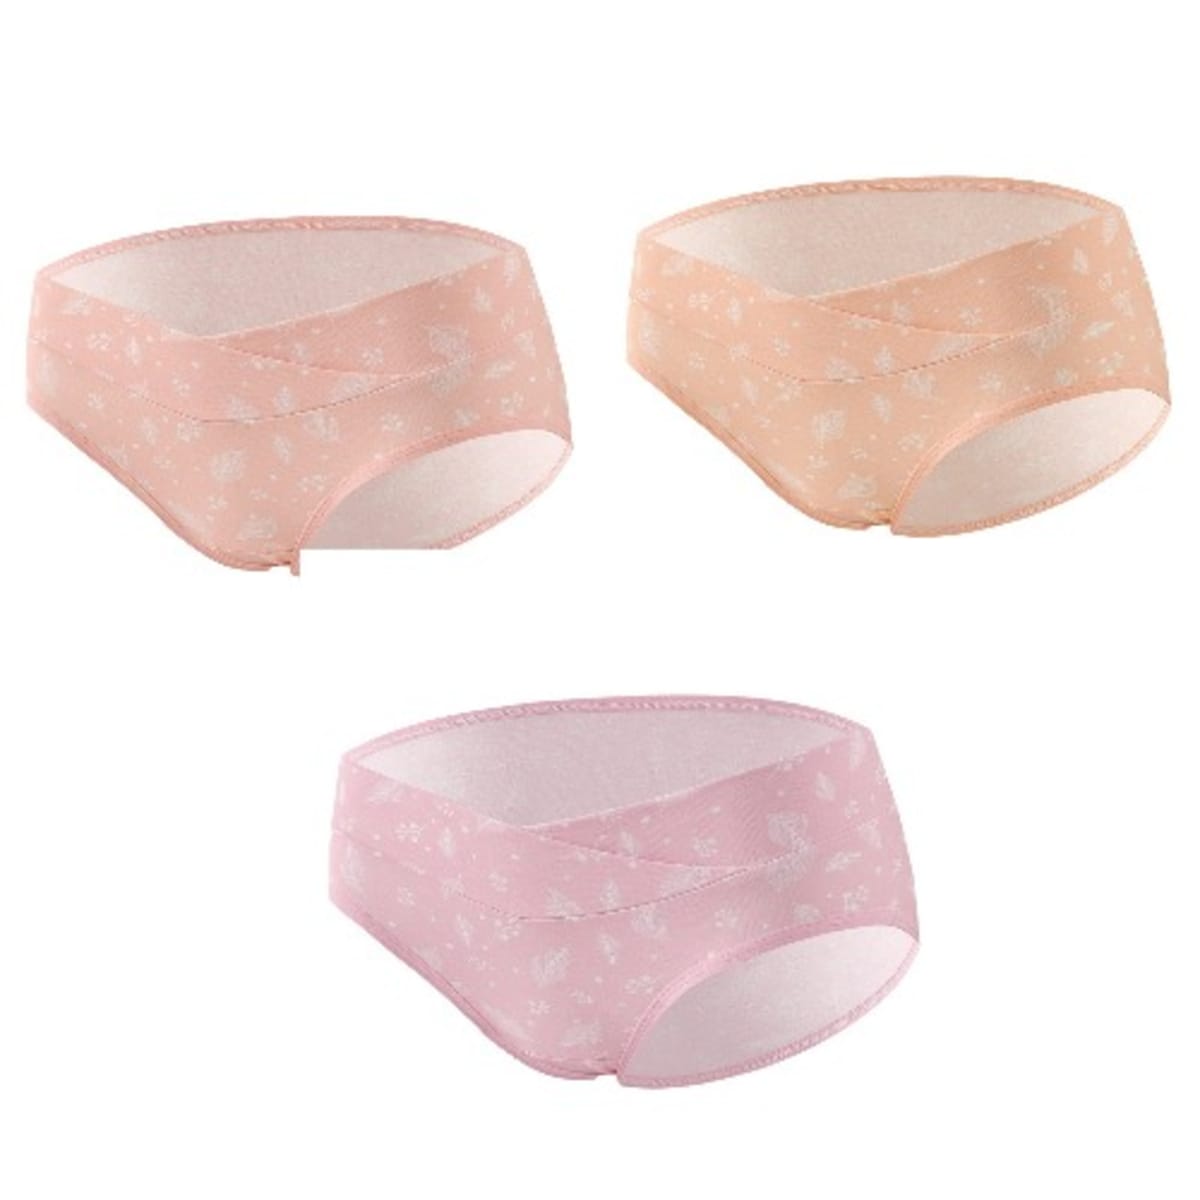 Under the Belly Pregnancy Maternity Panties 3 Pieces